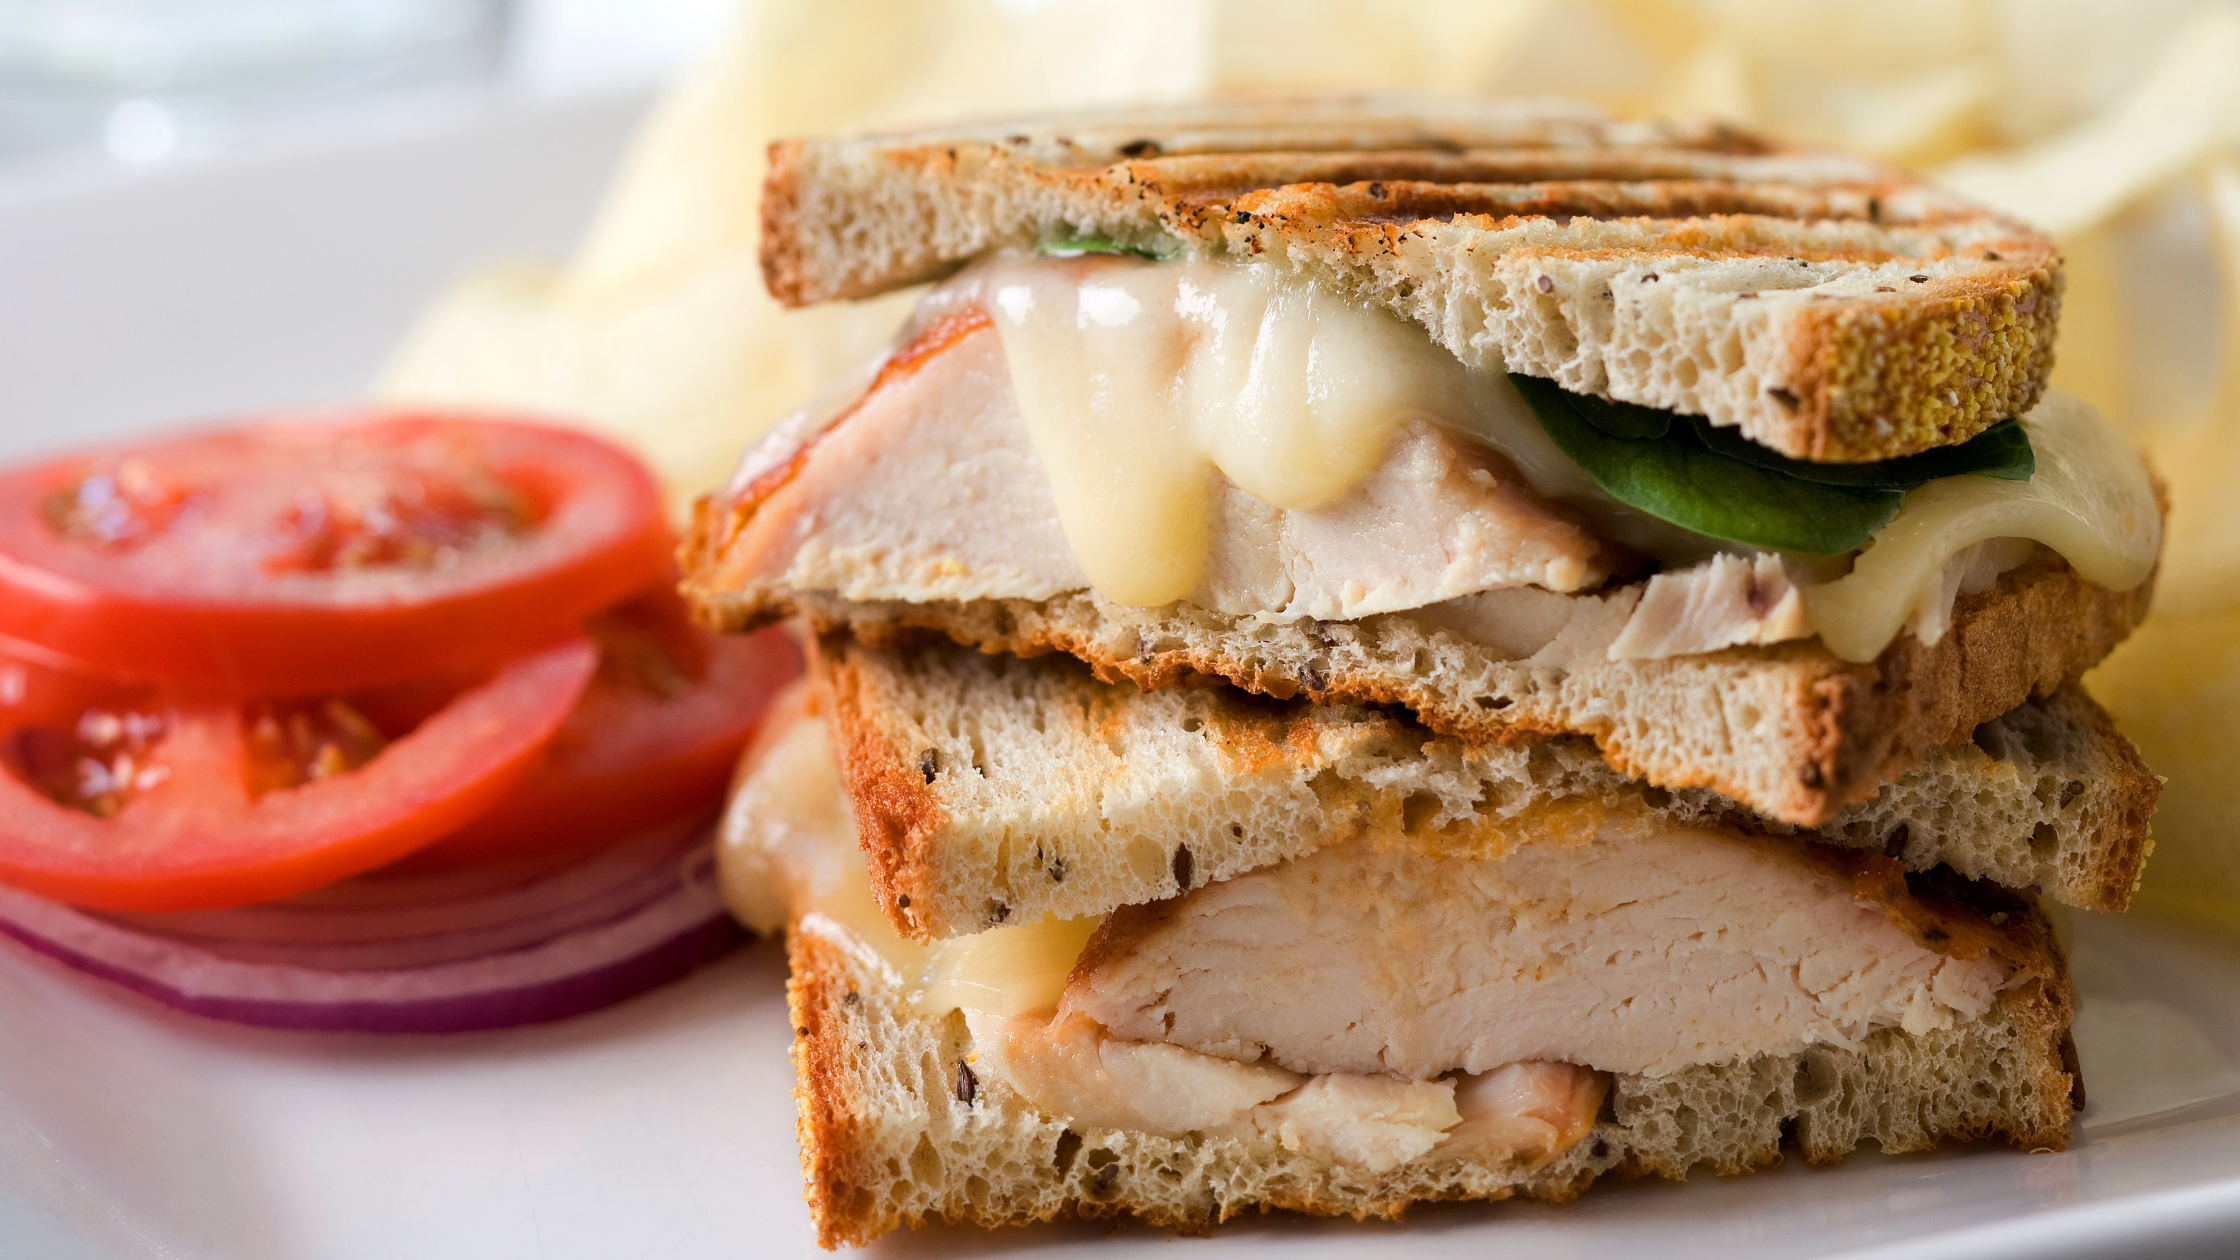 Flavorful Grilled Chicken & Brie Panini 21